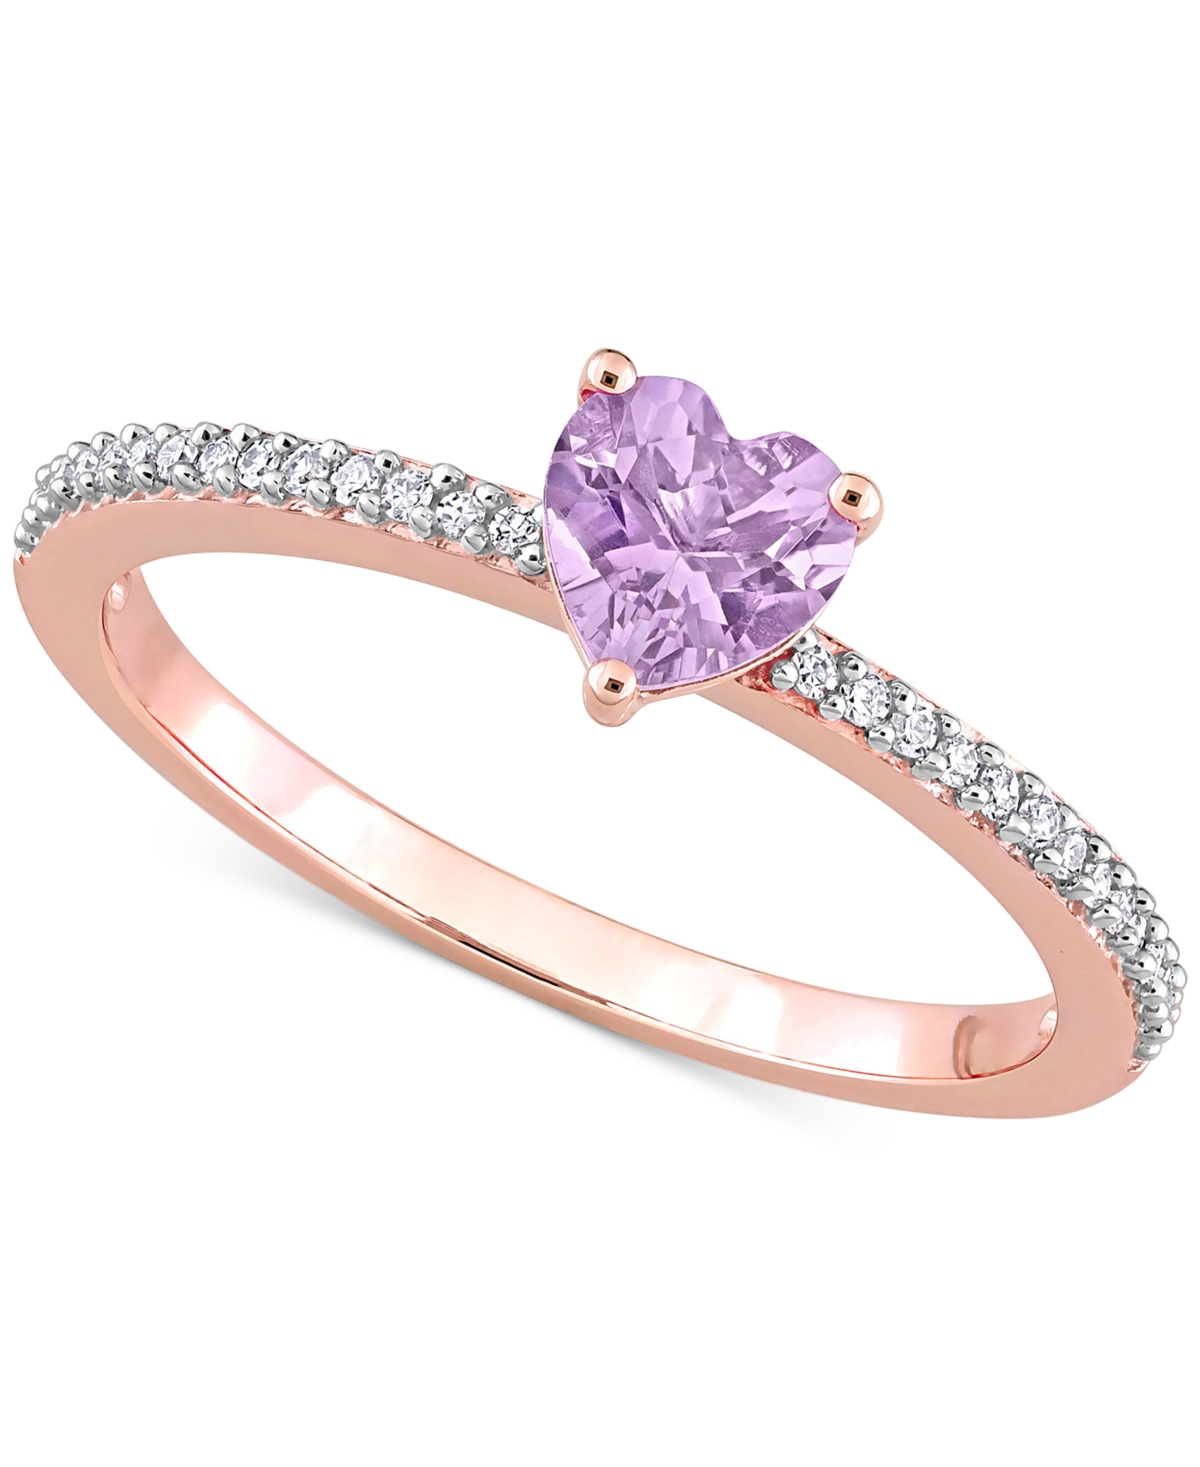 Pink Amethyst (3/8 ct. t.w.) & Diamond (1/10 ct. t.w.) Heart Promise Ring in 10k Rose Gold - Pink Amethyst